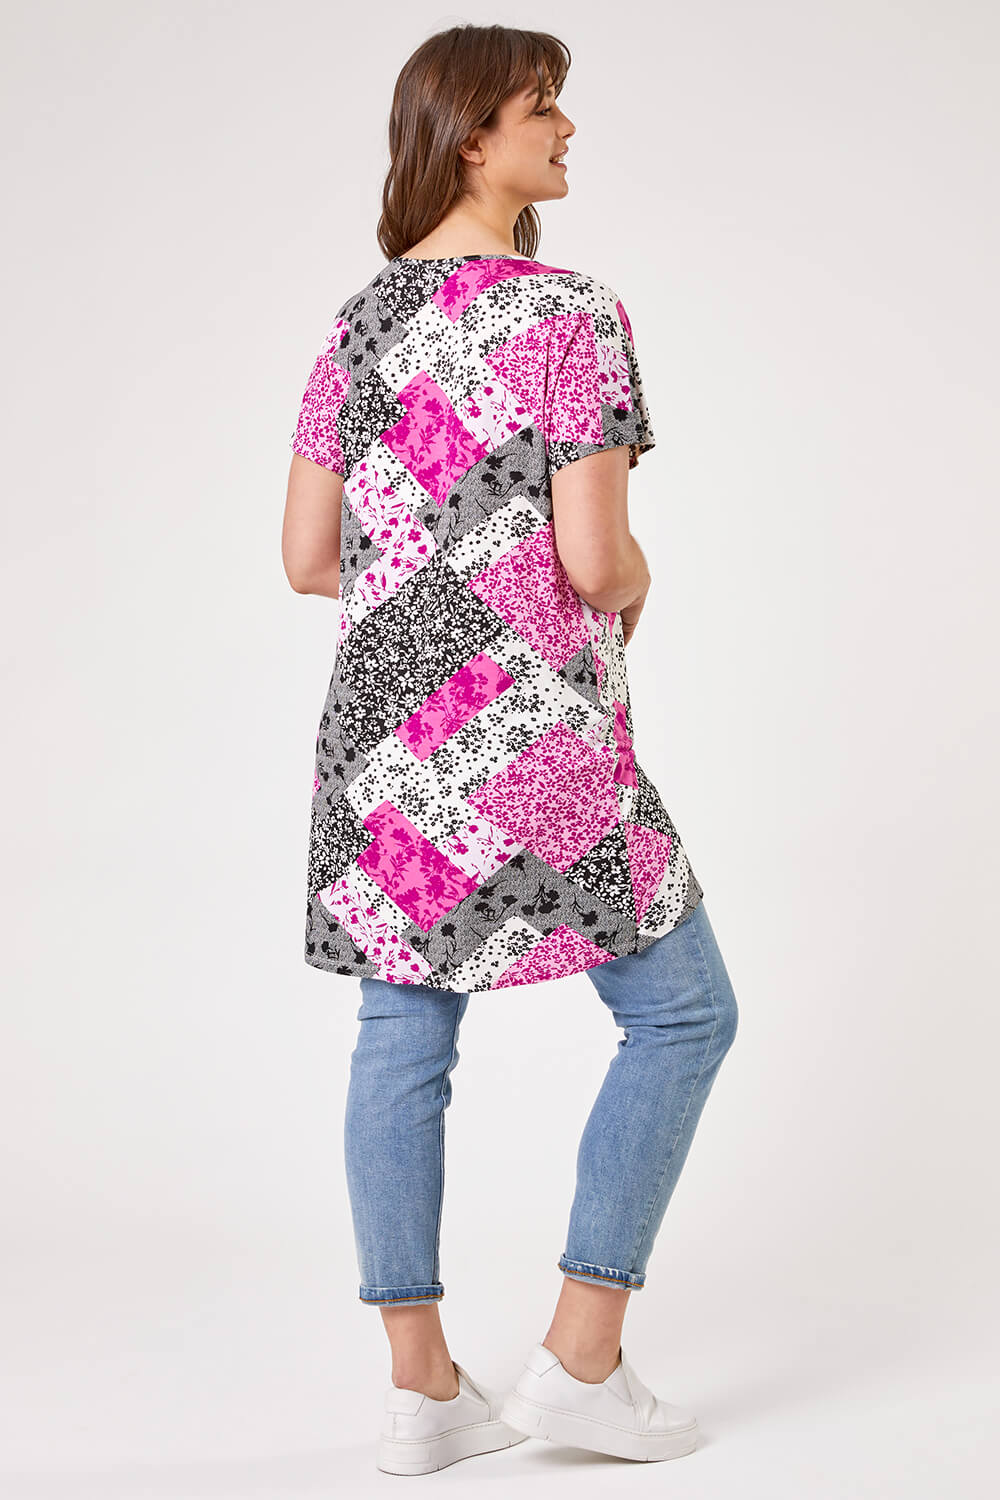 PINK Curve Patchwork Print Cross Detail Top, Image 2 of 4